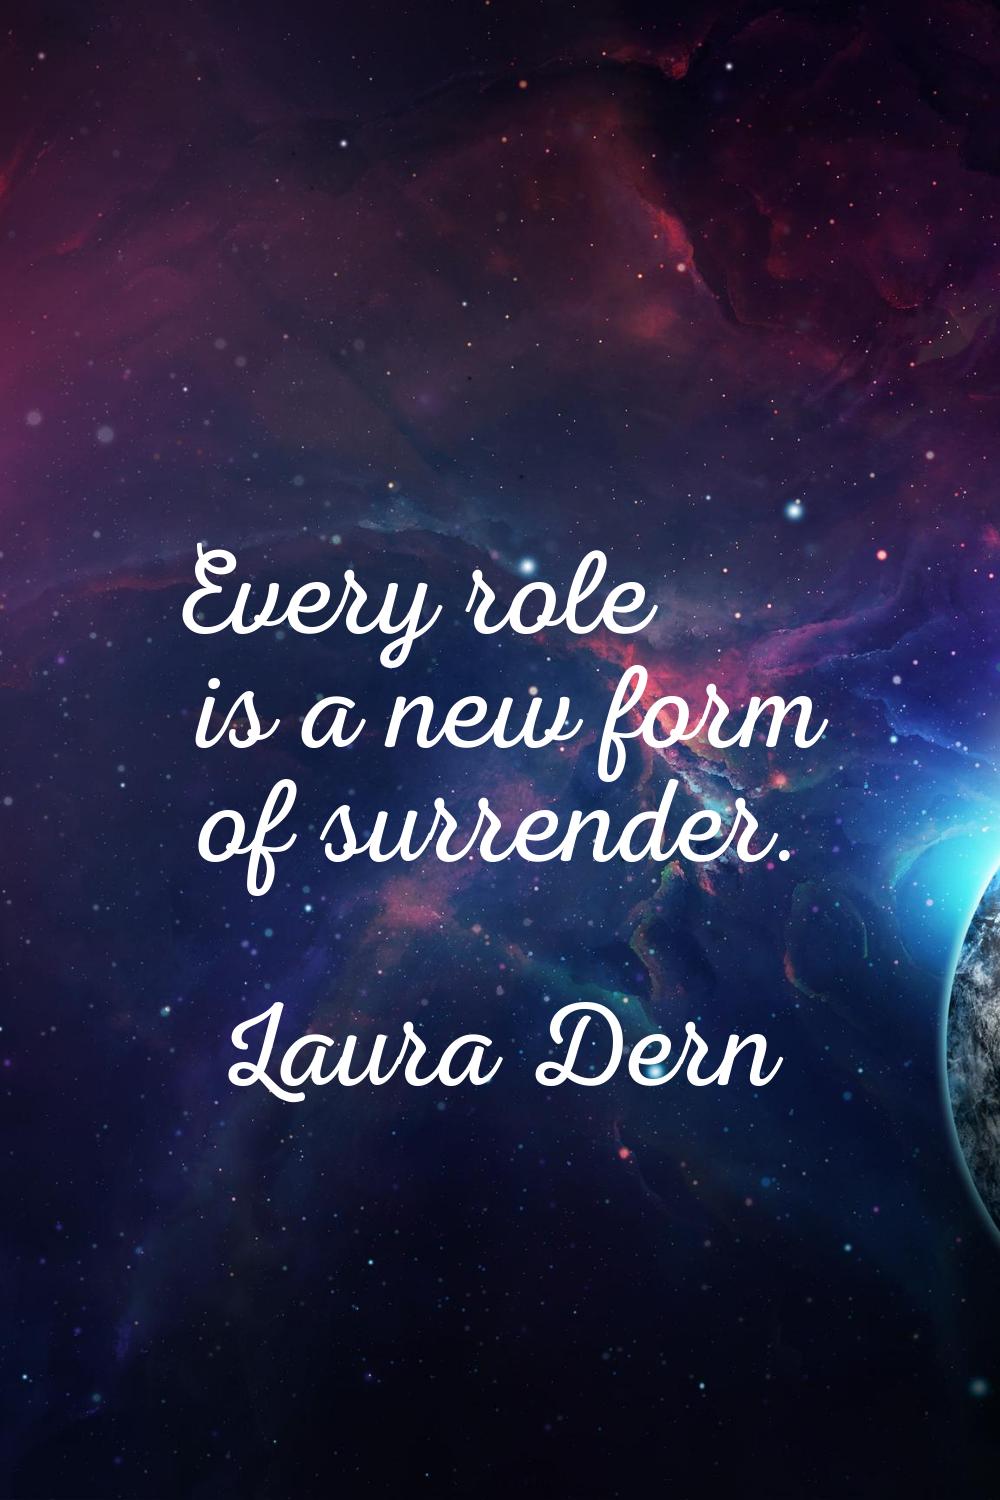 Every role is a new form of surrender.